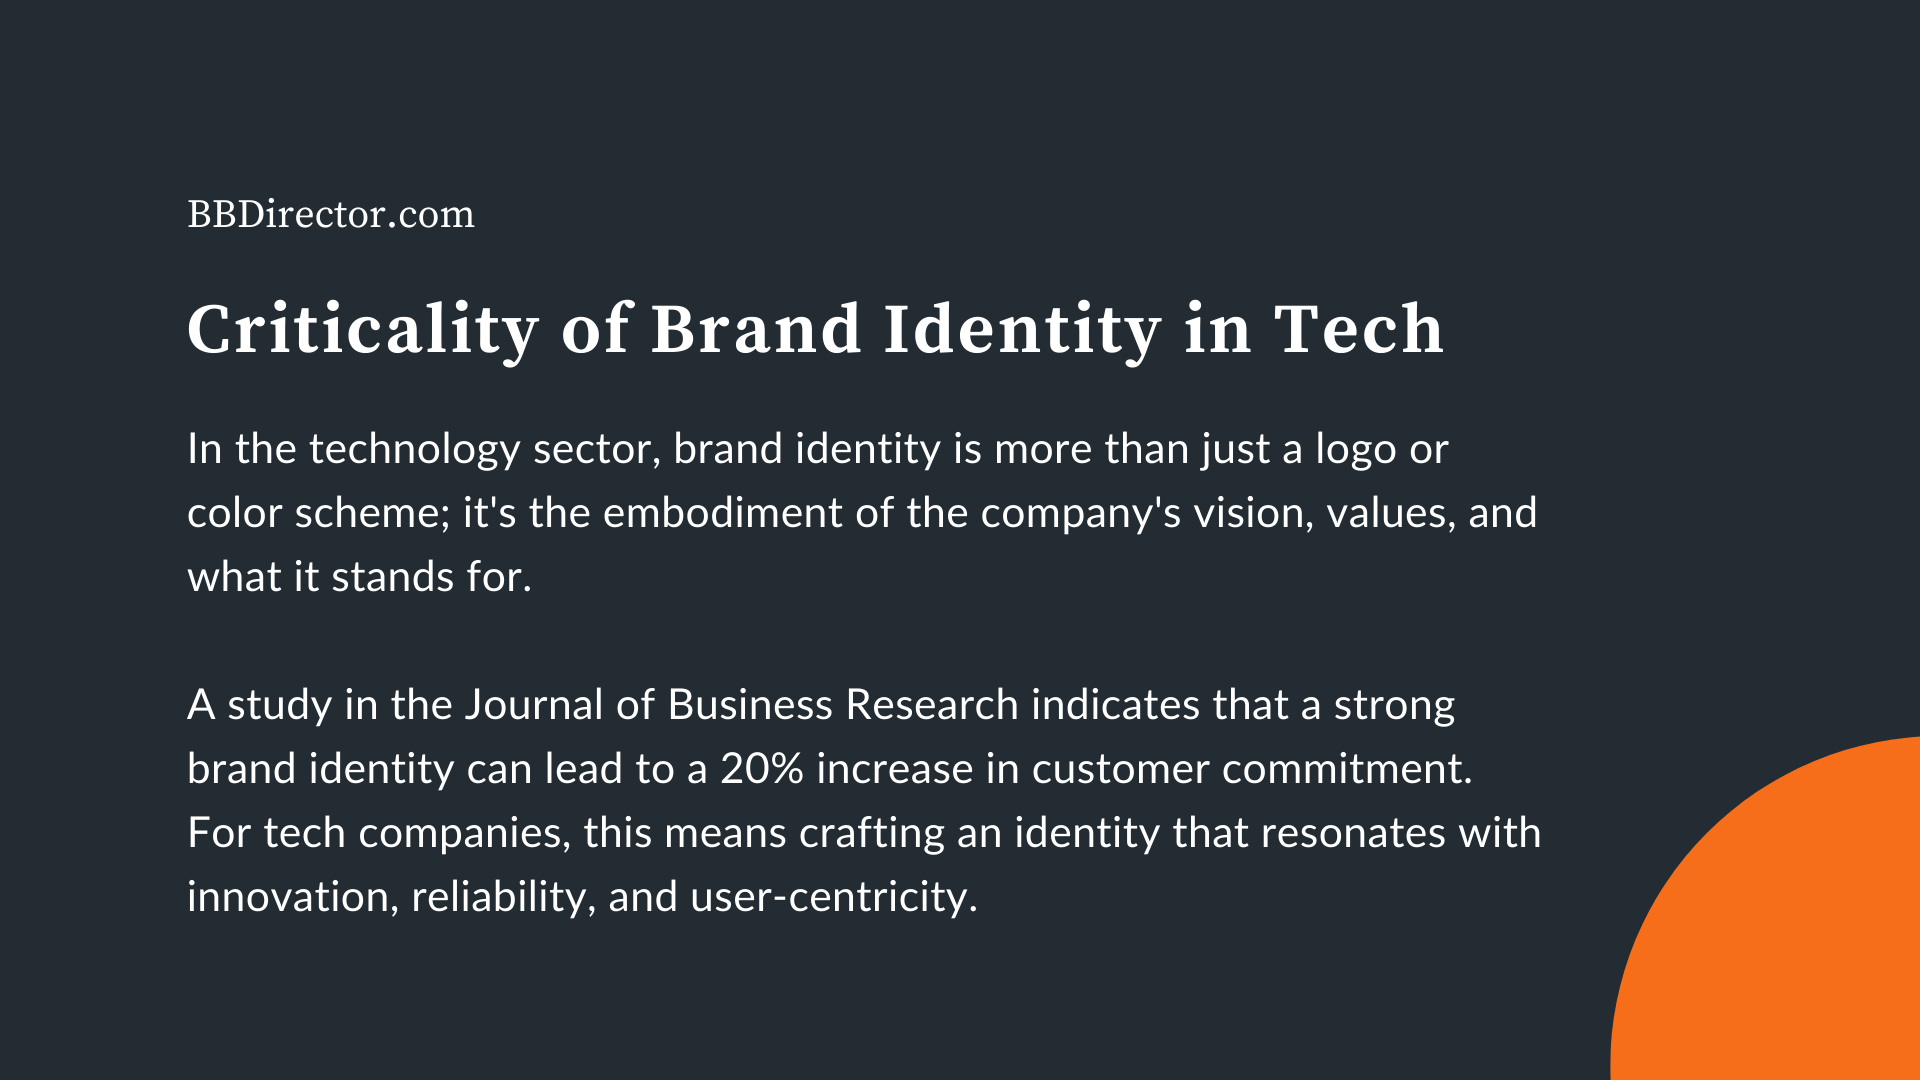 Criticality of Brand Identity in Tech